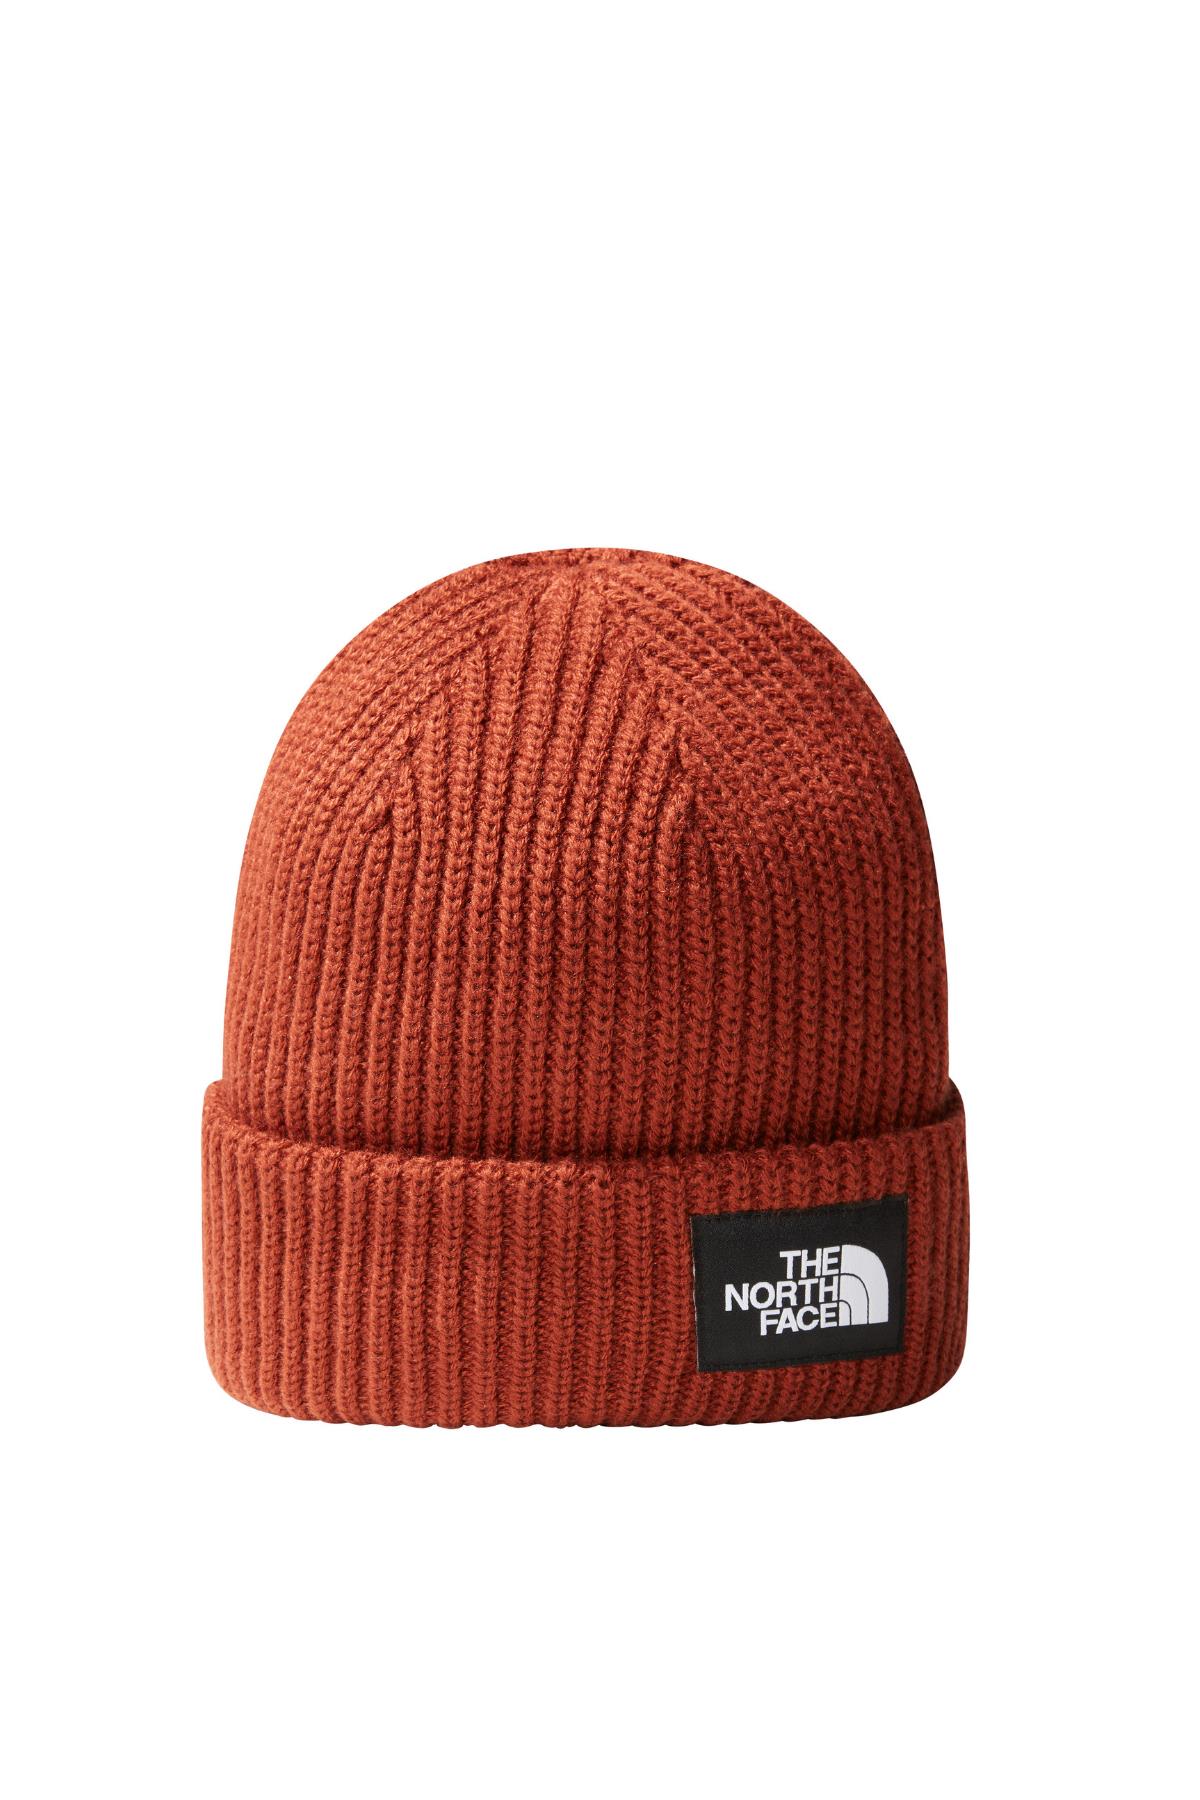 The North Face Salty Lined Beanie Bere